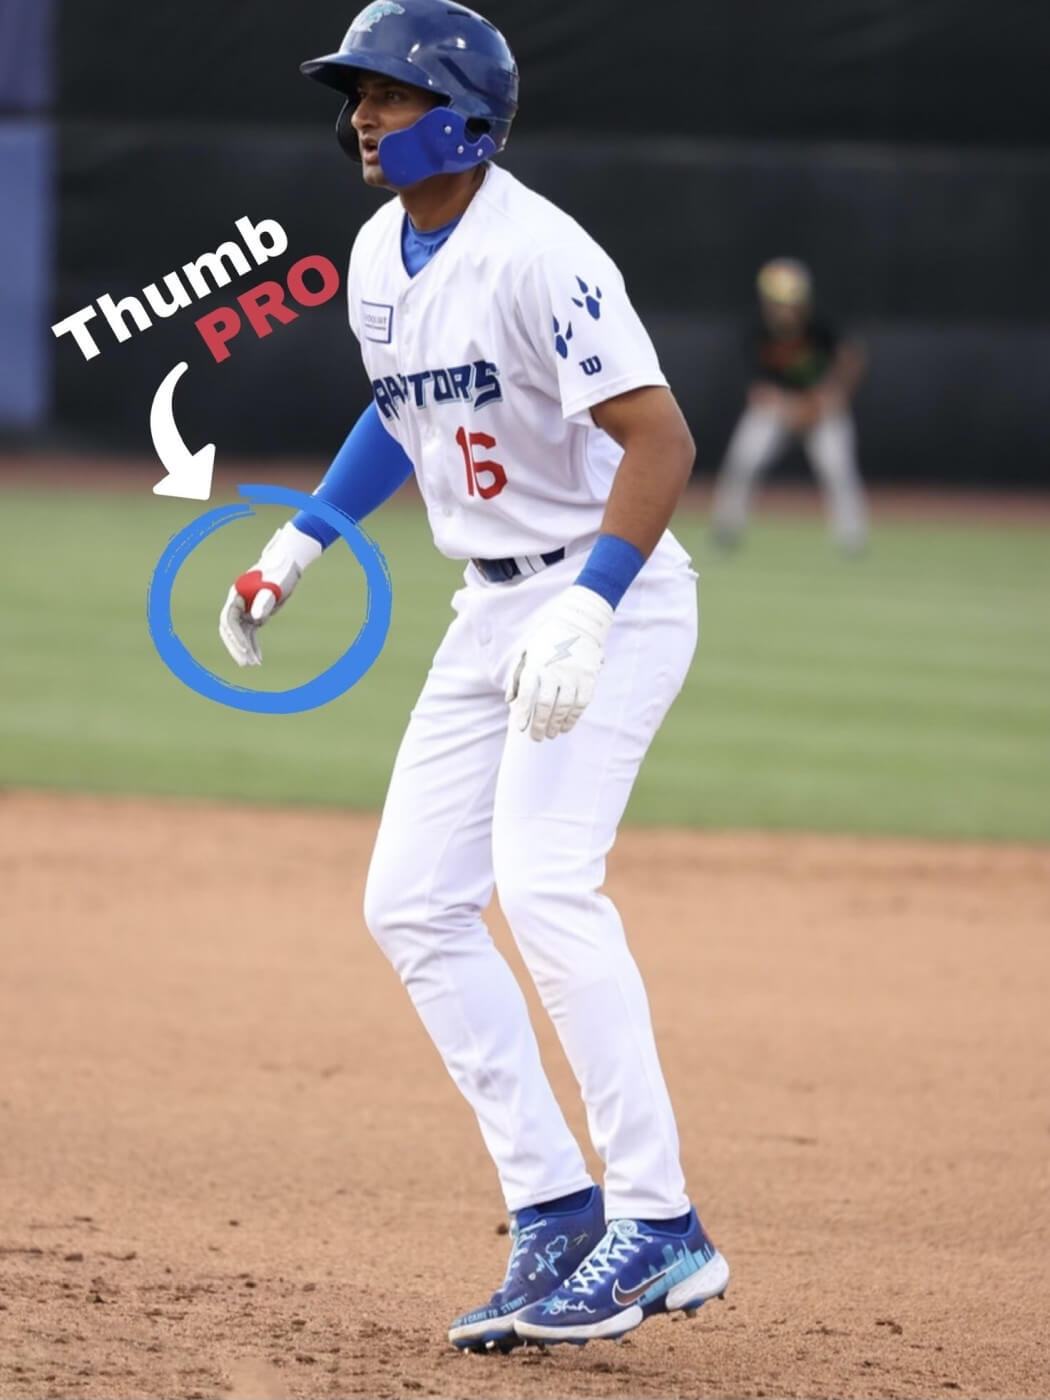 ThumbPRO Baseball Best in the Game